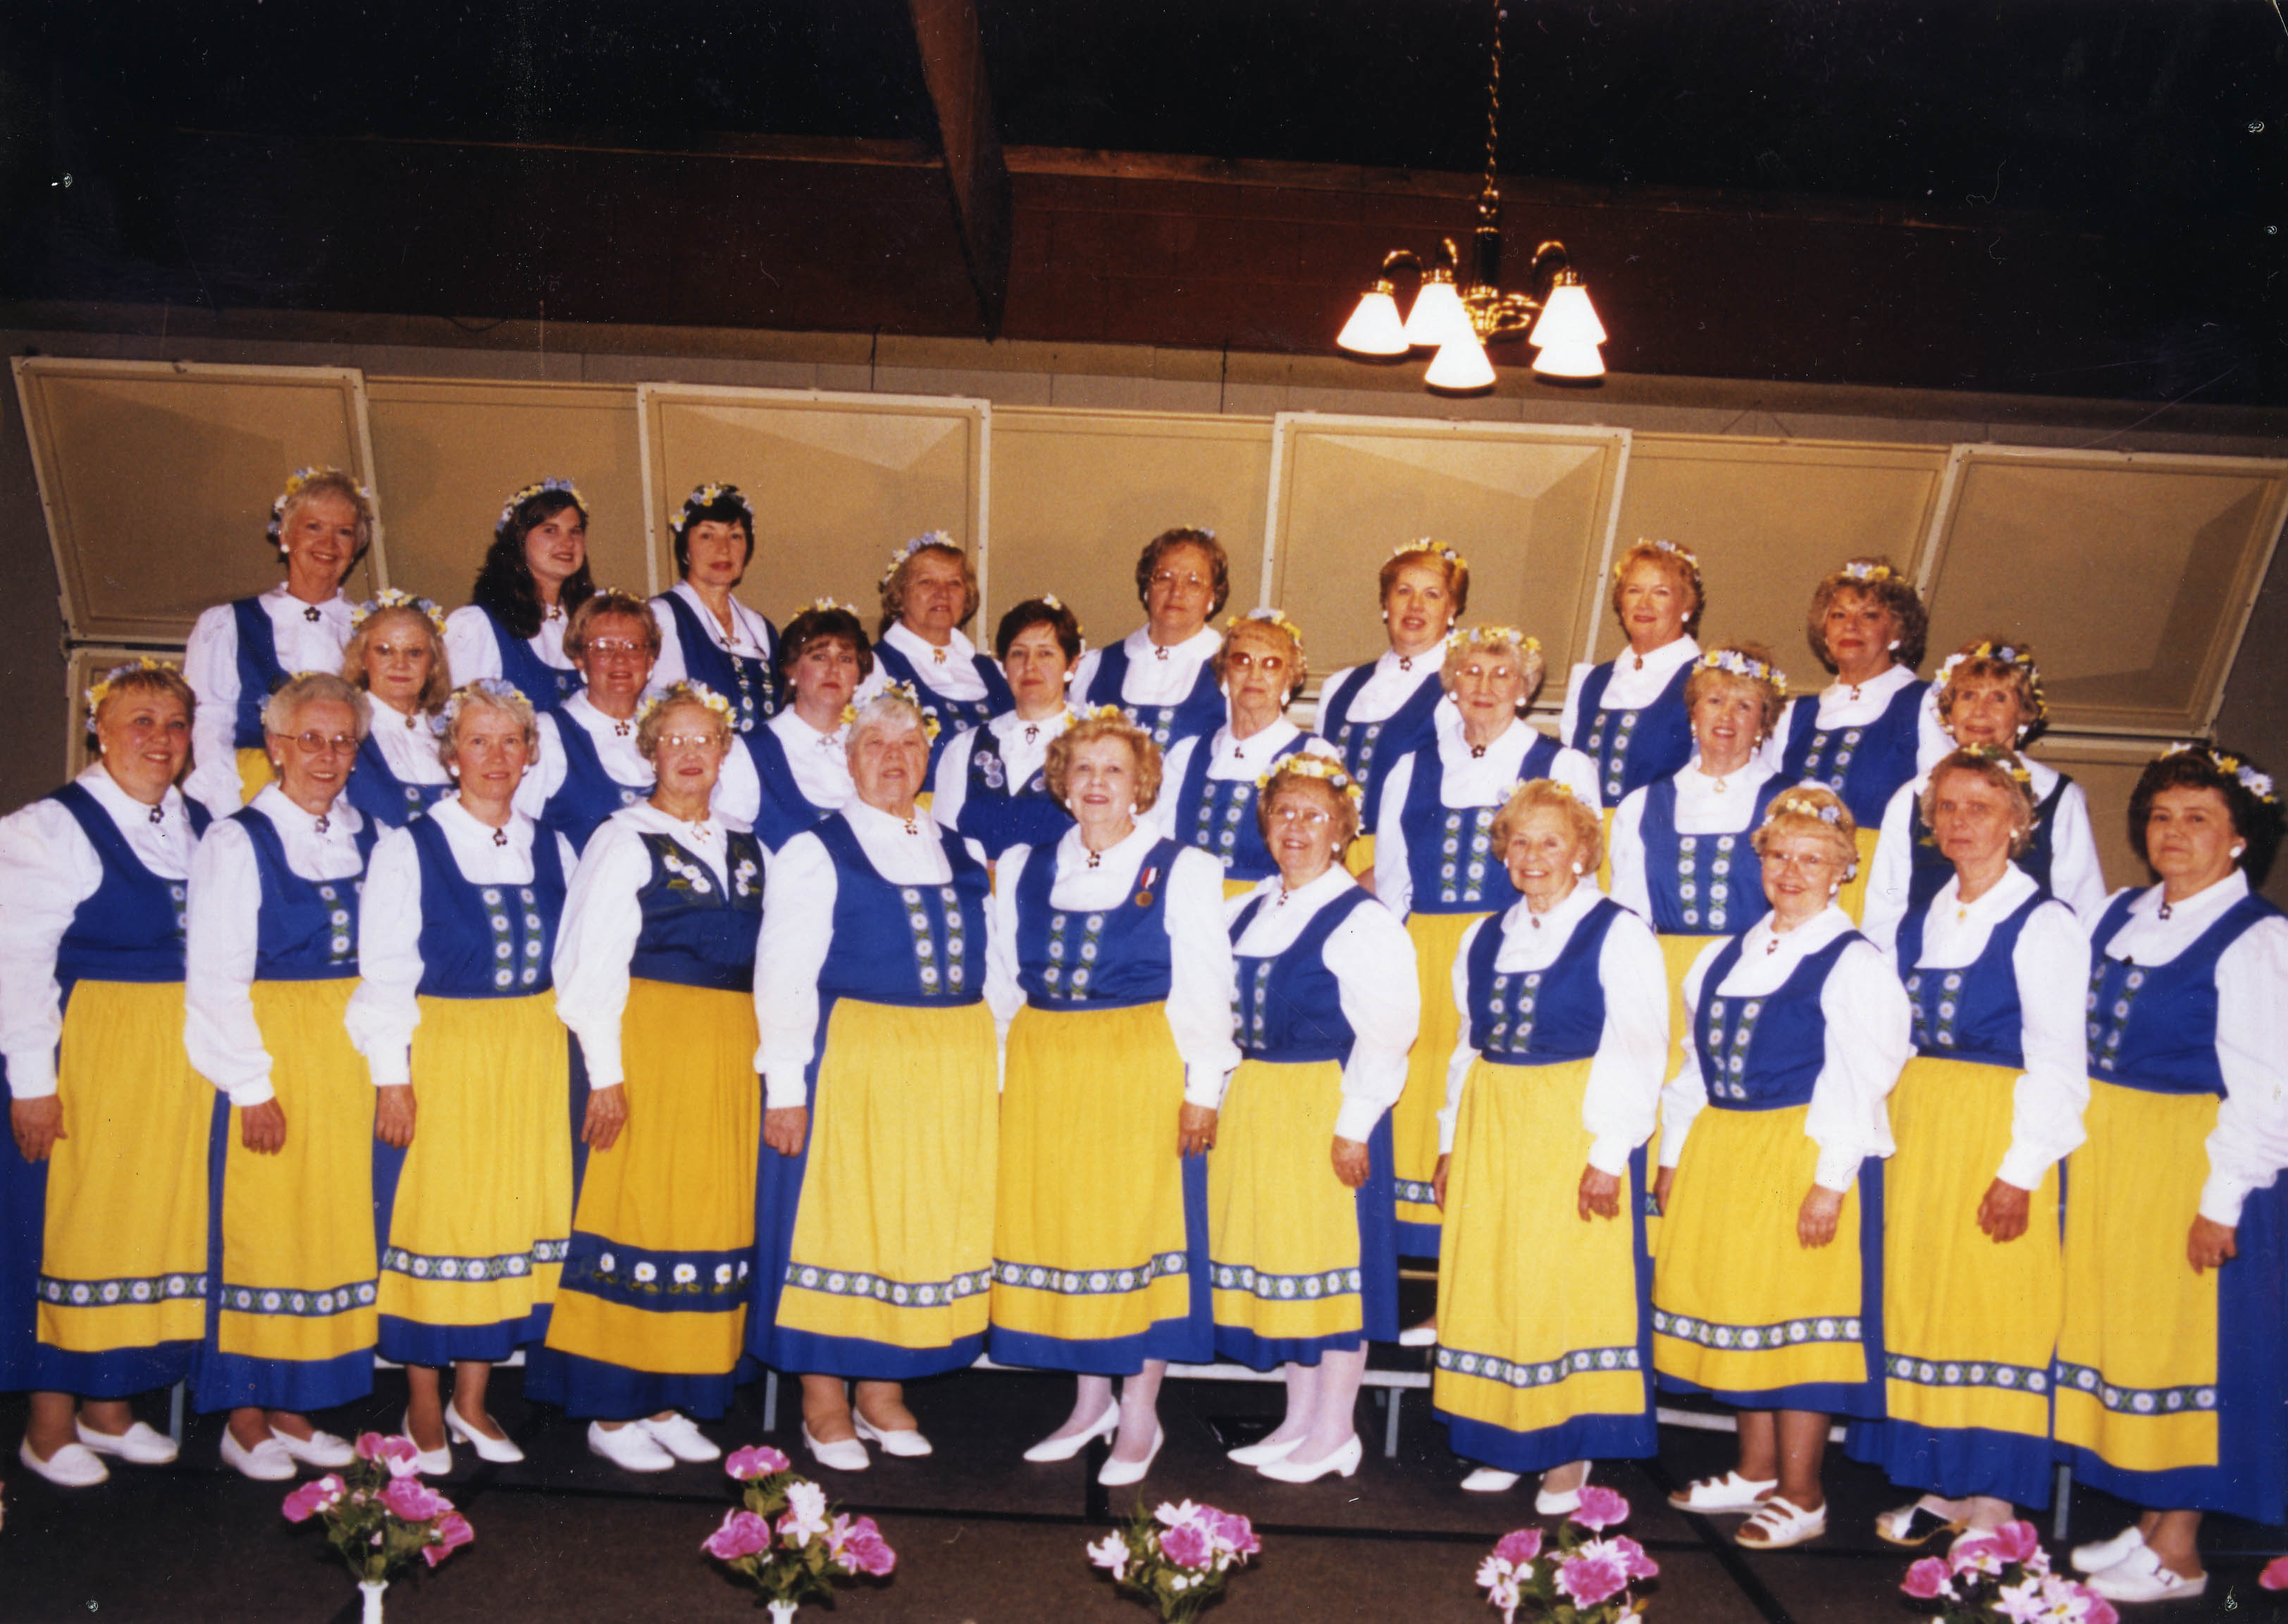 The Scandia Chorus from the Swedish Club in Farmington, Michigan. From American Union of Swedish Singers records, Swenson Swedish Immigration Research Center.